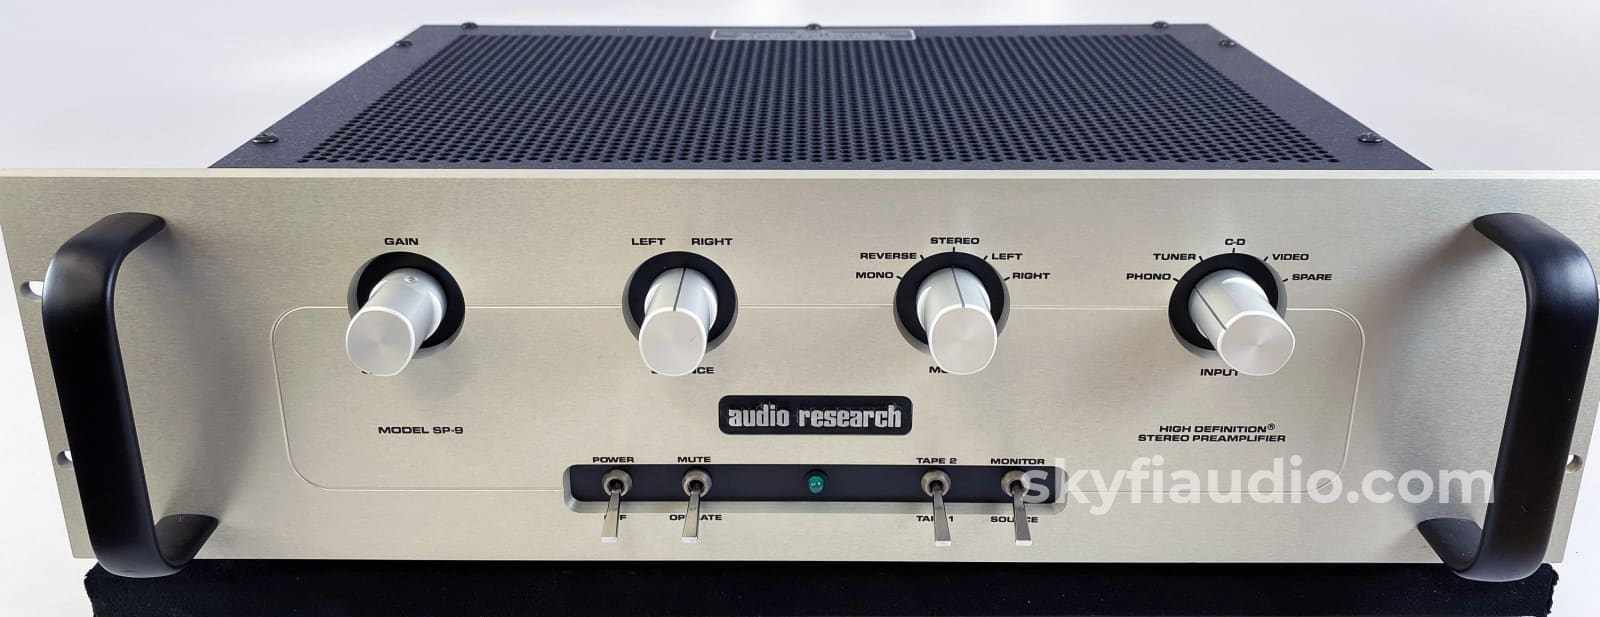 Audio Research SP9 MKII Tube / Solid State Hybrid Preamp with Phono In